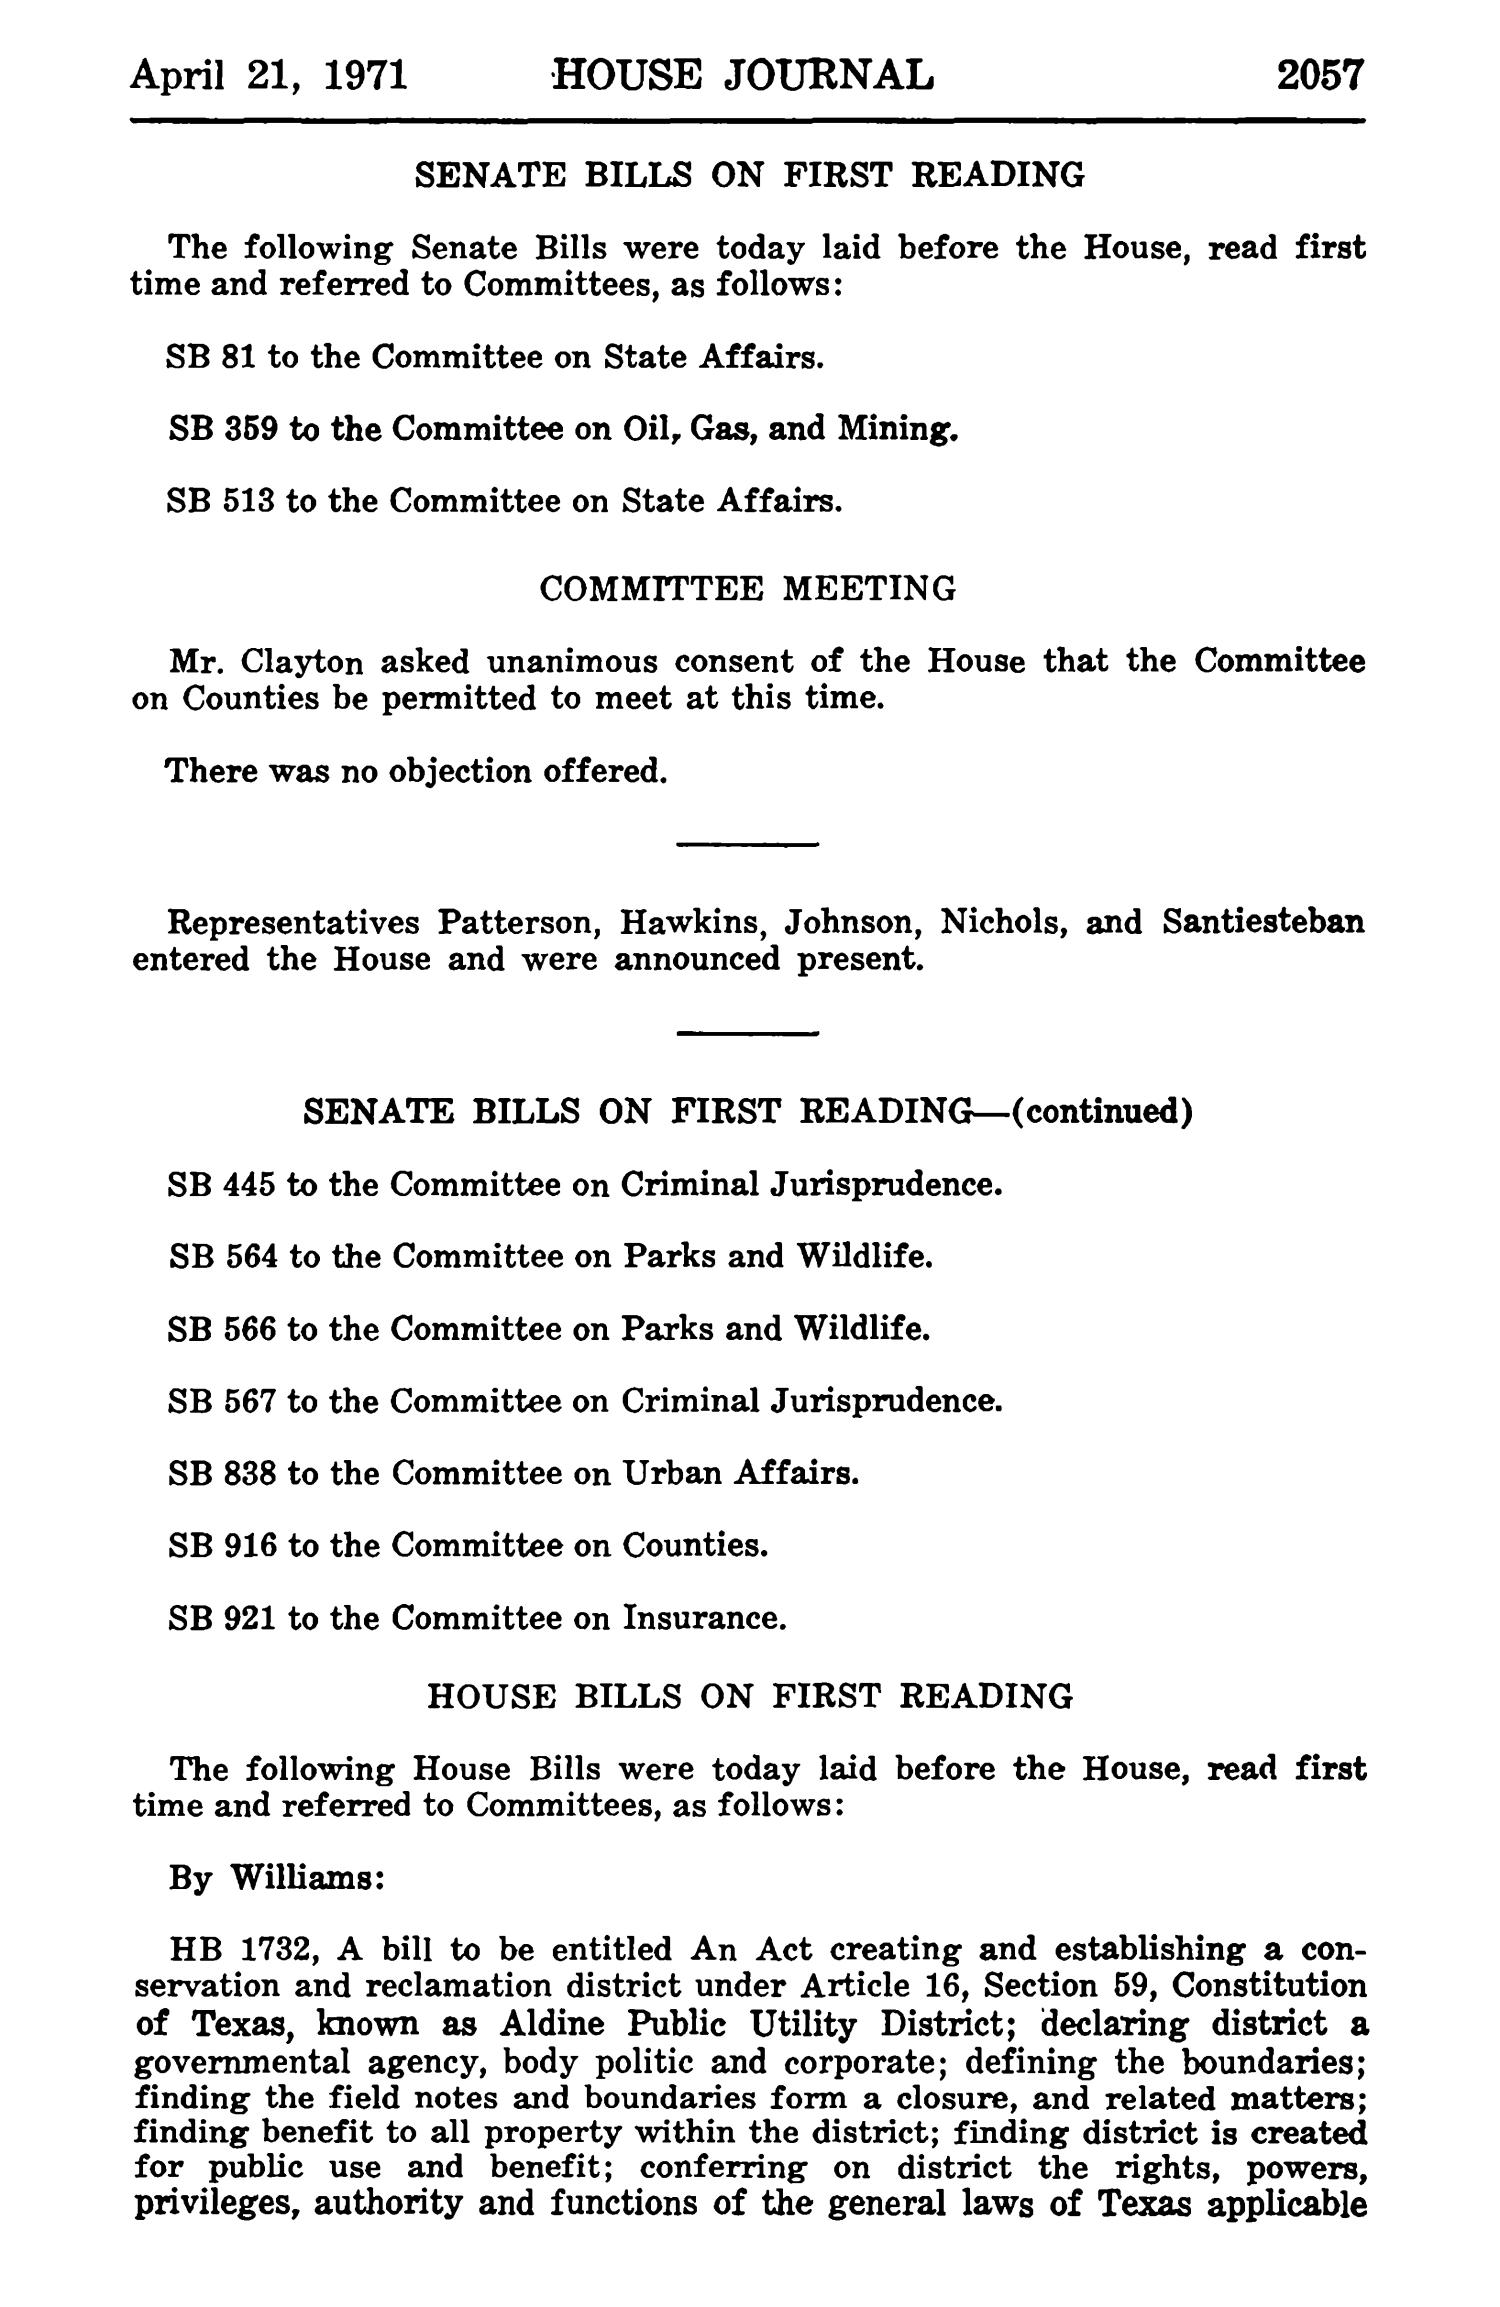 Journal of the House of Representatives of the Regular Session of the Sixty-Second Legislature of the State of Texas, Volume 2
                                                
                                                    2057
                                                